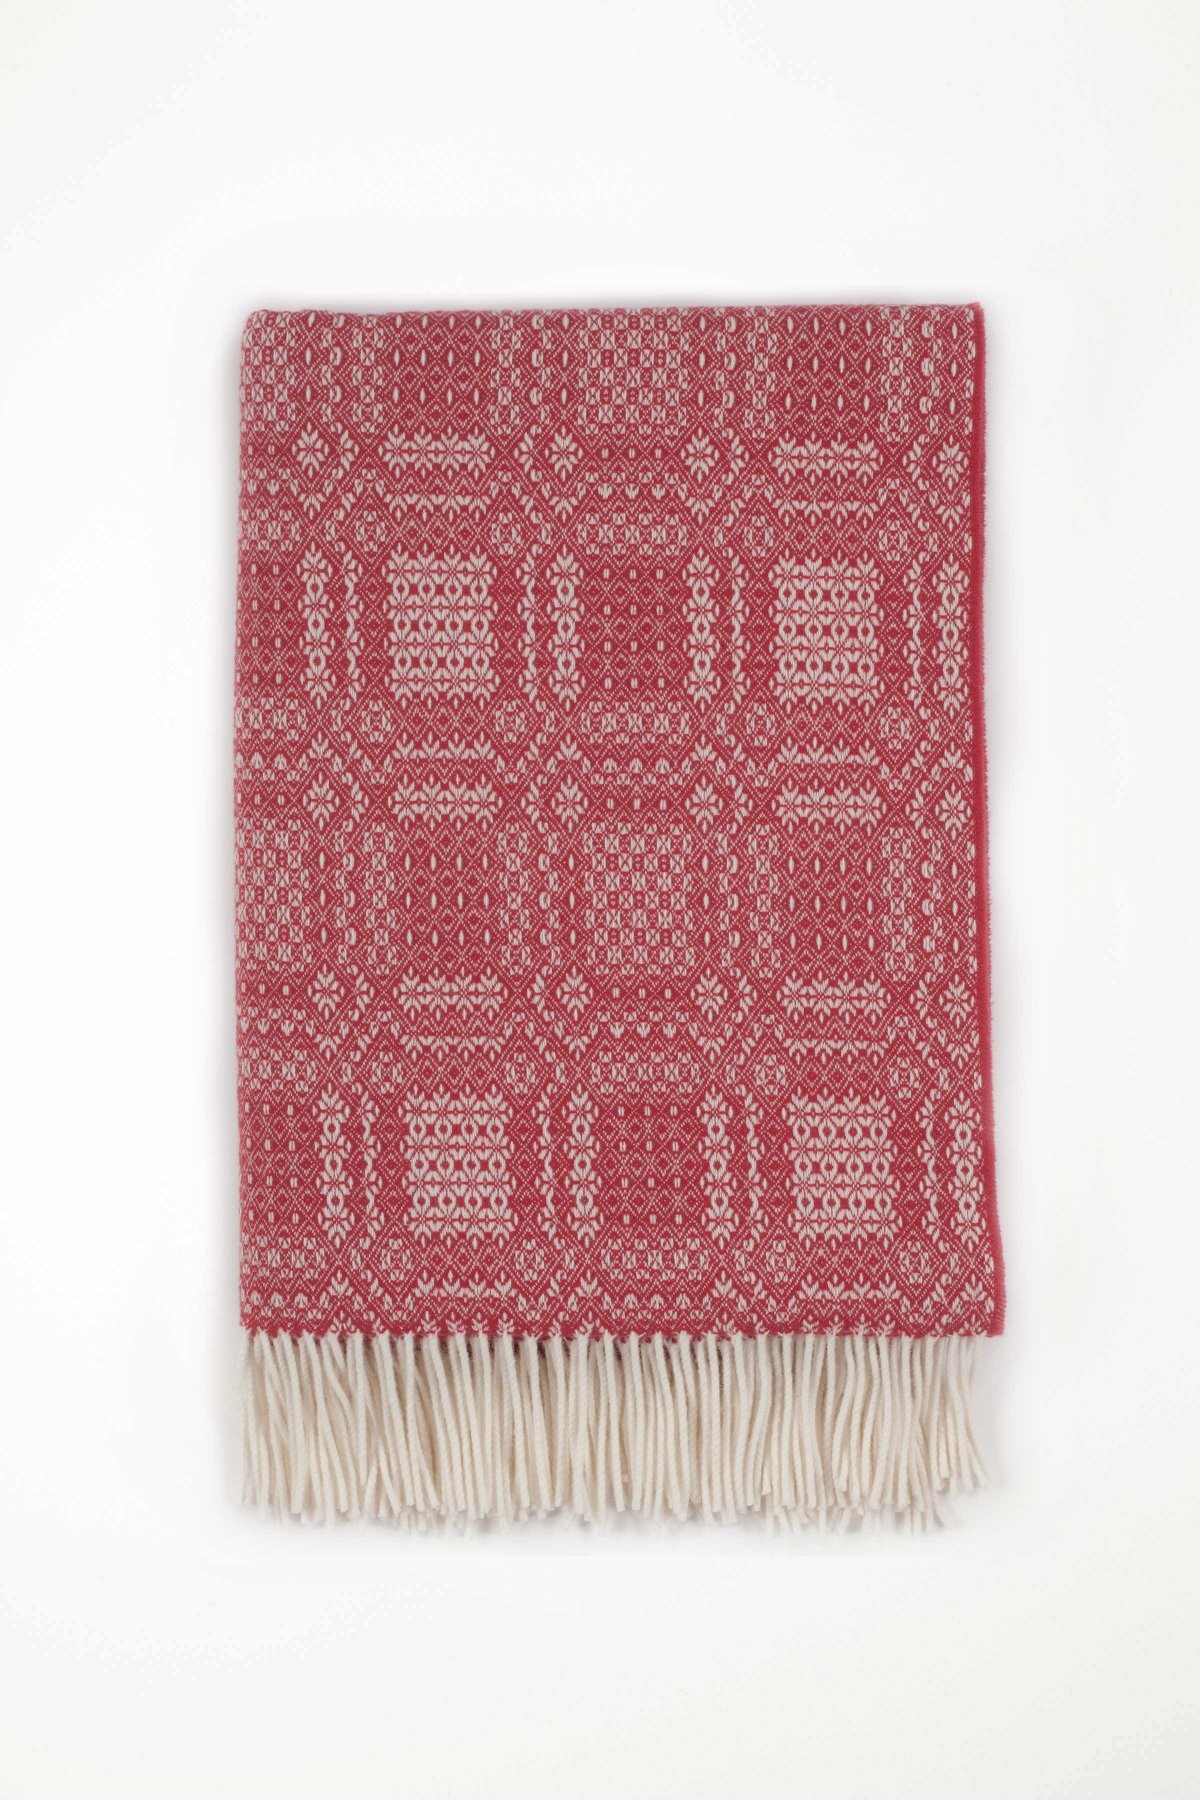 Johnston's of Elgin Lambswool Folkloric Throw - Red